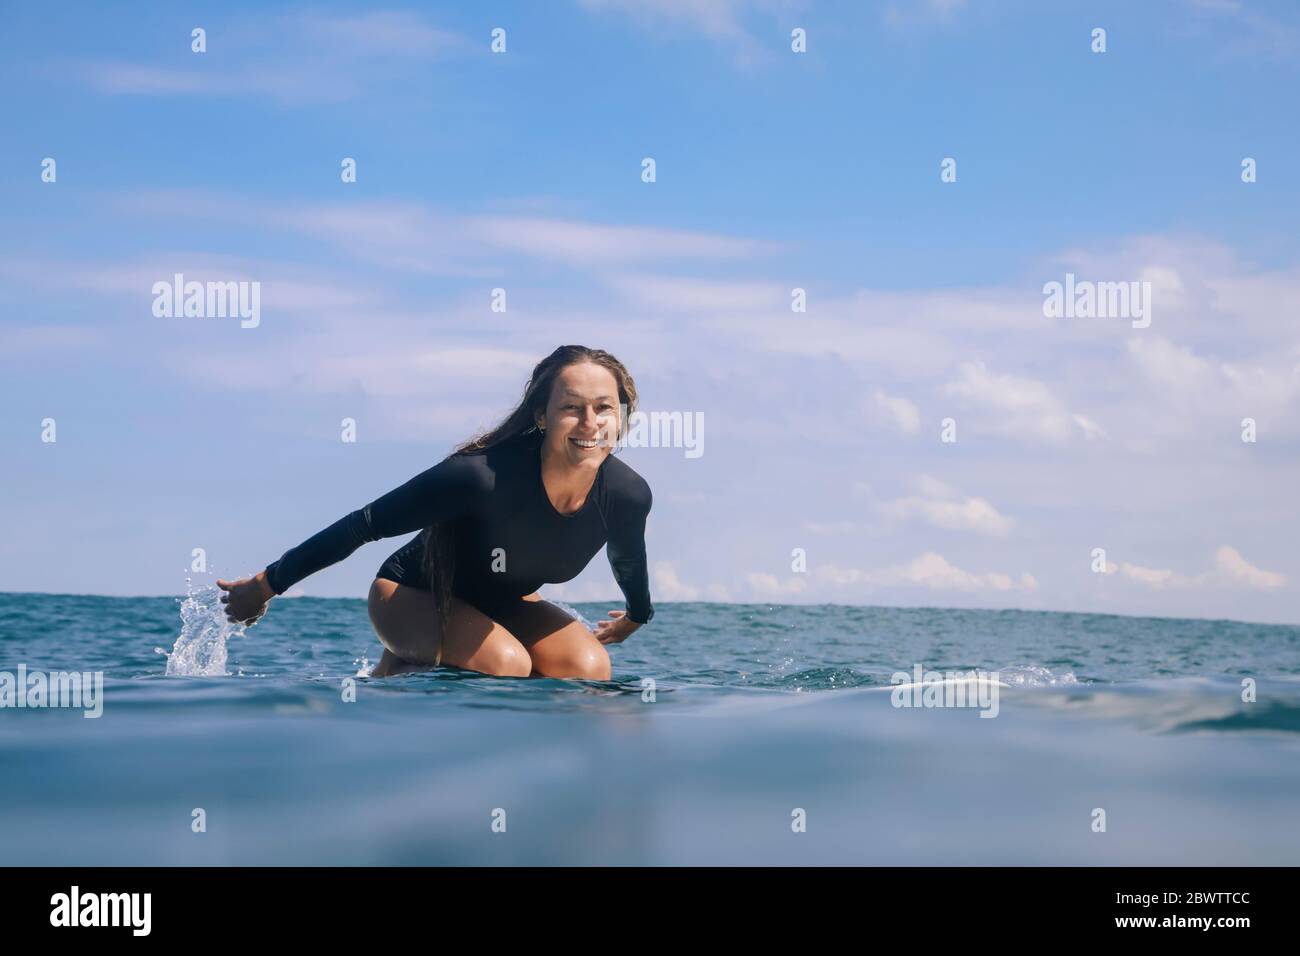 Portrait of a happy woman kneeling on surfboard in the sea, Bali, Indonesia Stock Photo